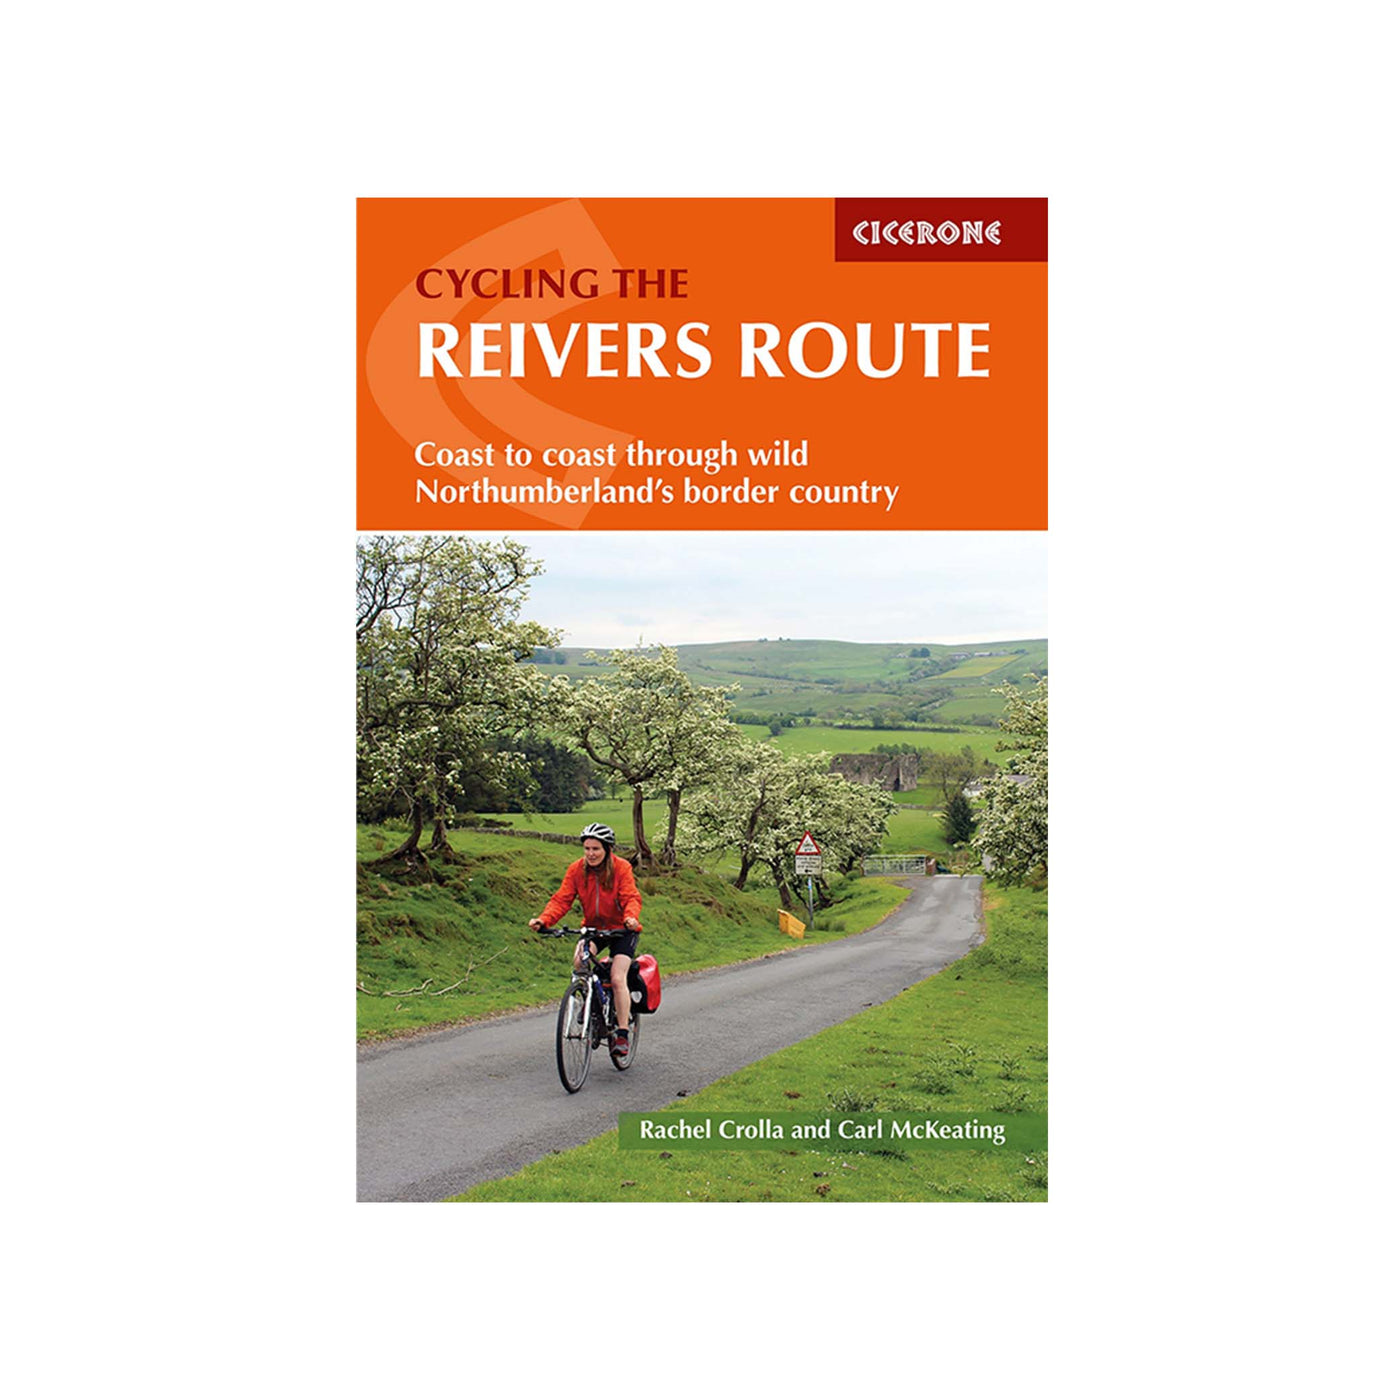 Cycling the Reivers Route: Coast to coast through wild Northumberland's border country.  Guidebook by Cicerone. Authors: Rachel Crolla and Carl McKeating. 